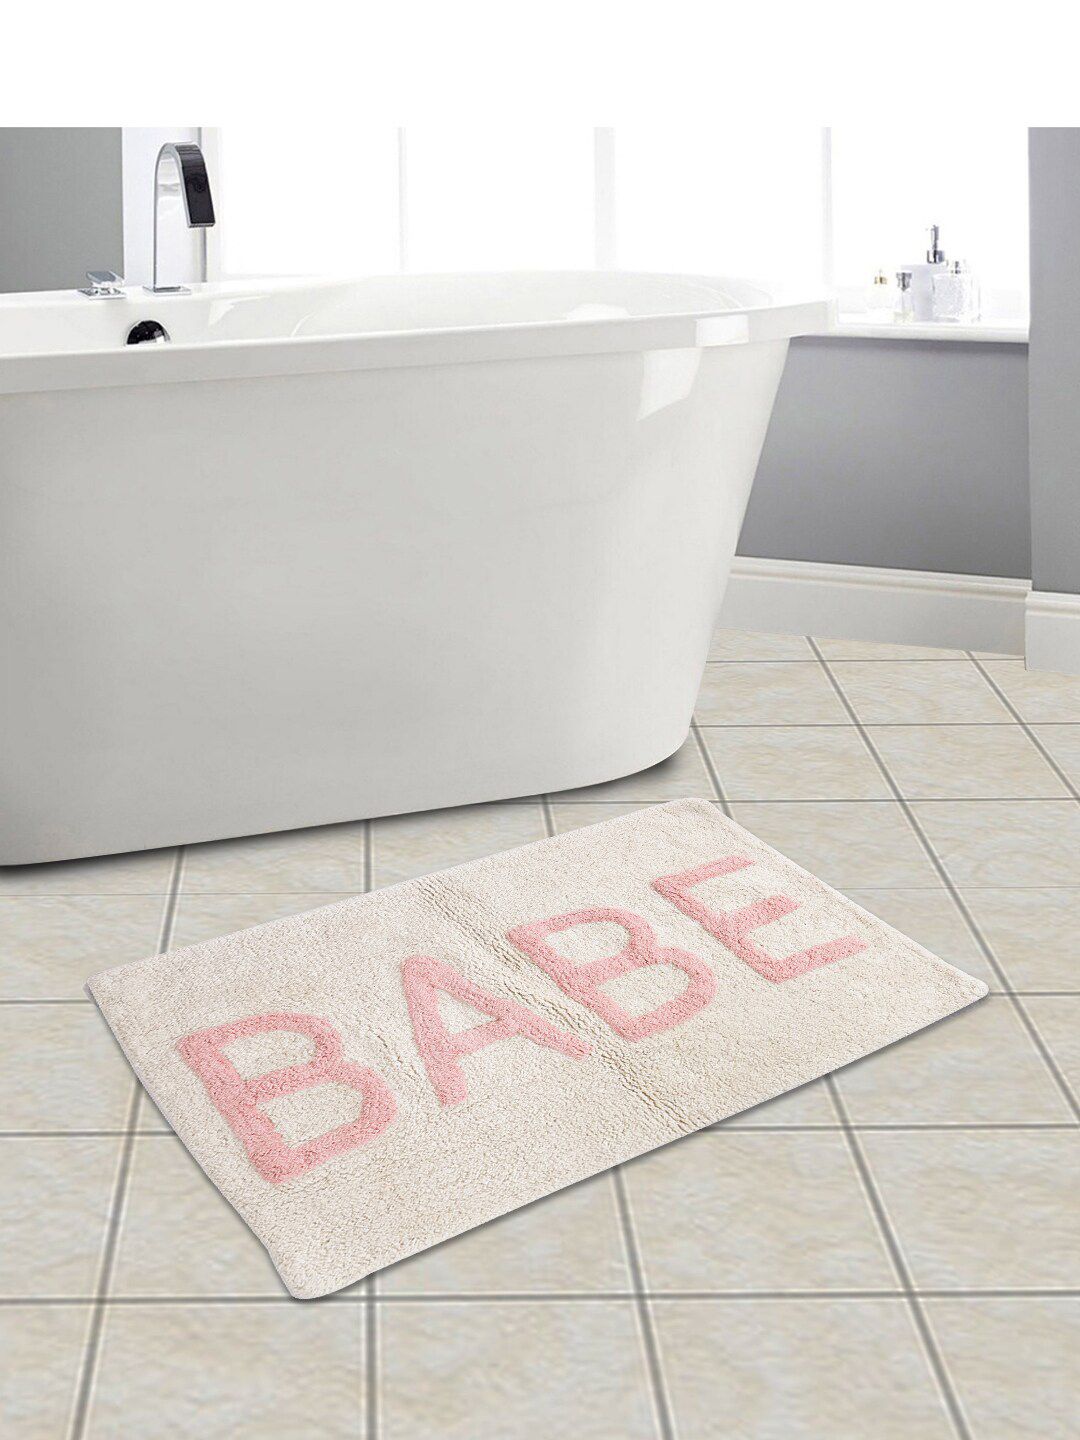 eyda White and Pink Printed Cotton Bath Rug Price in India